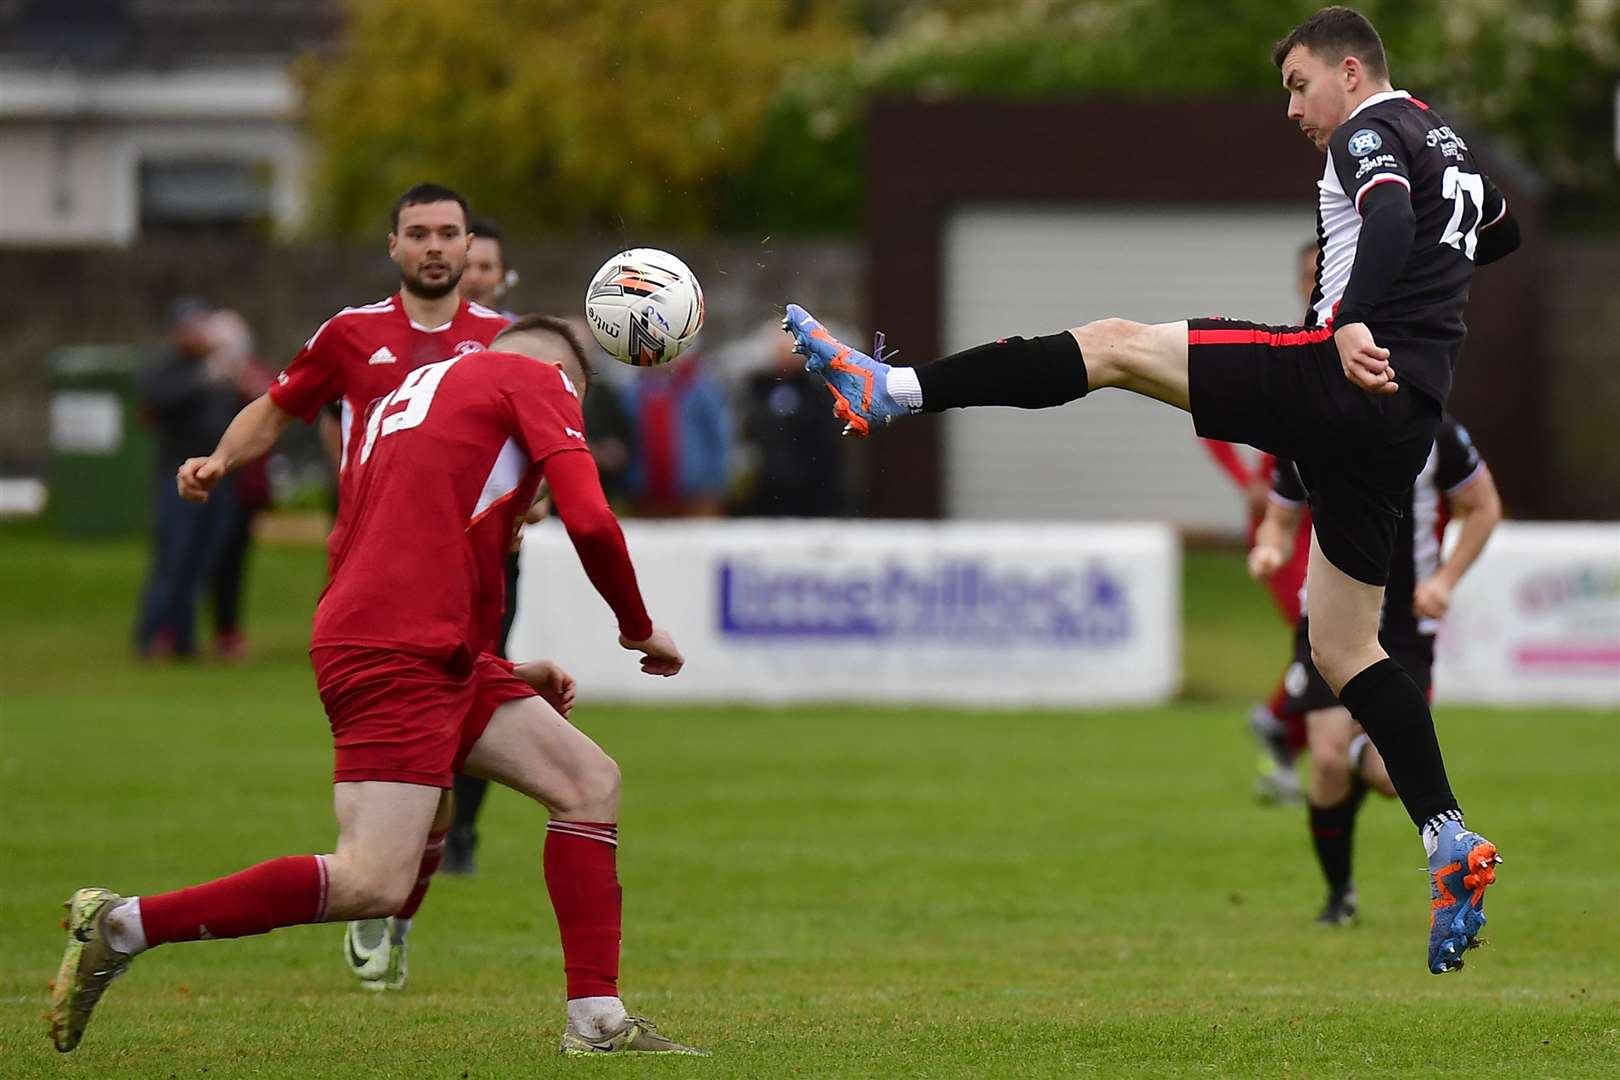 Ryan Campbell of Wick Academy stretches for the ball ahead of James Leslie in the Scorries' last outing, a 1-0 defeat at Lossiemouth. Picture: Mel Roger